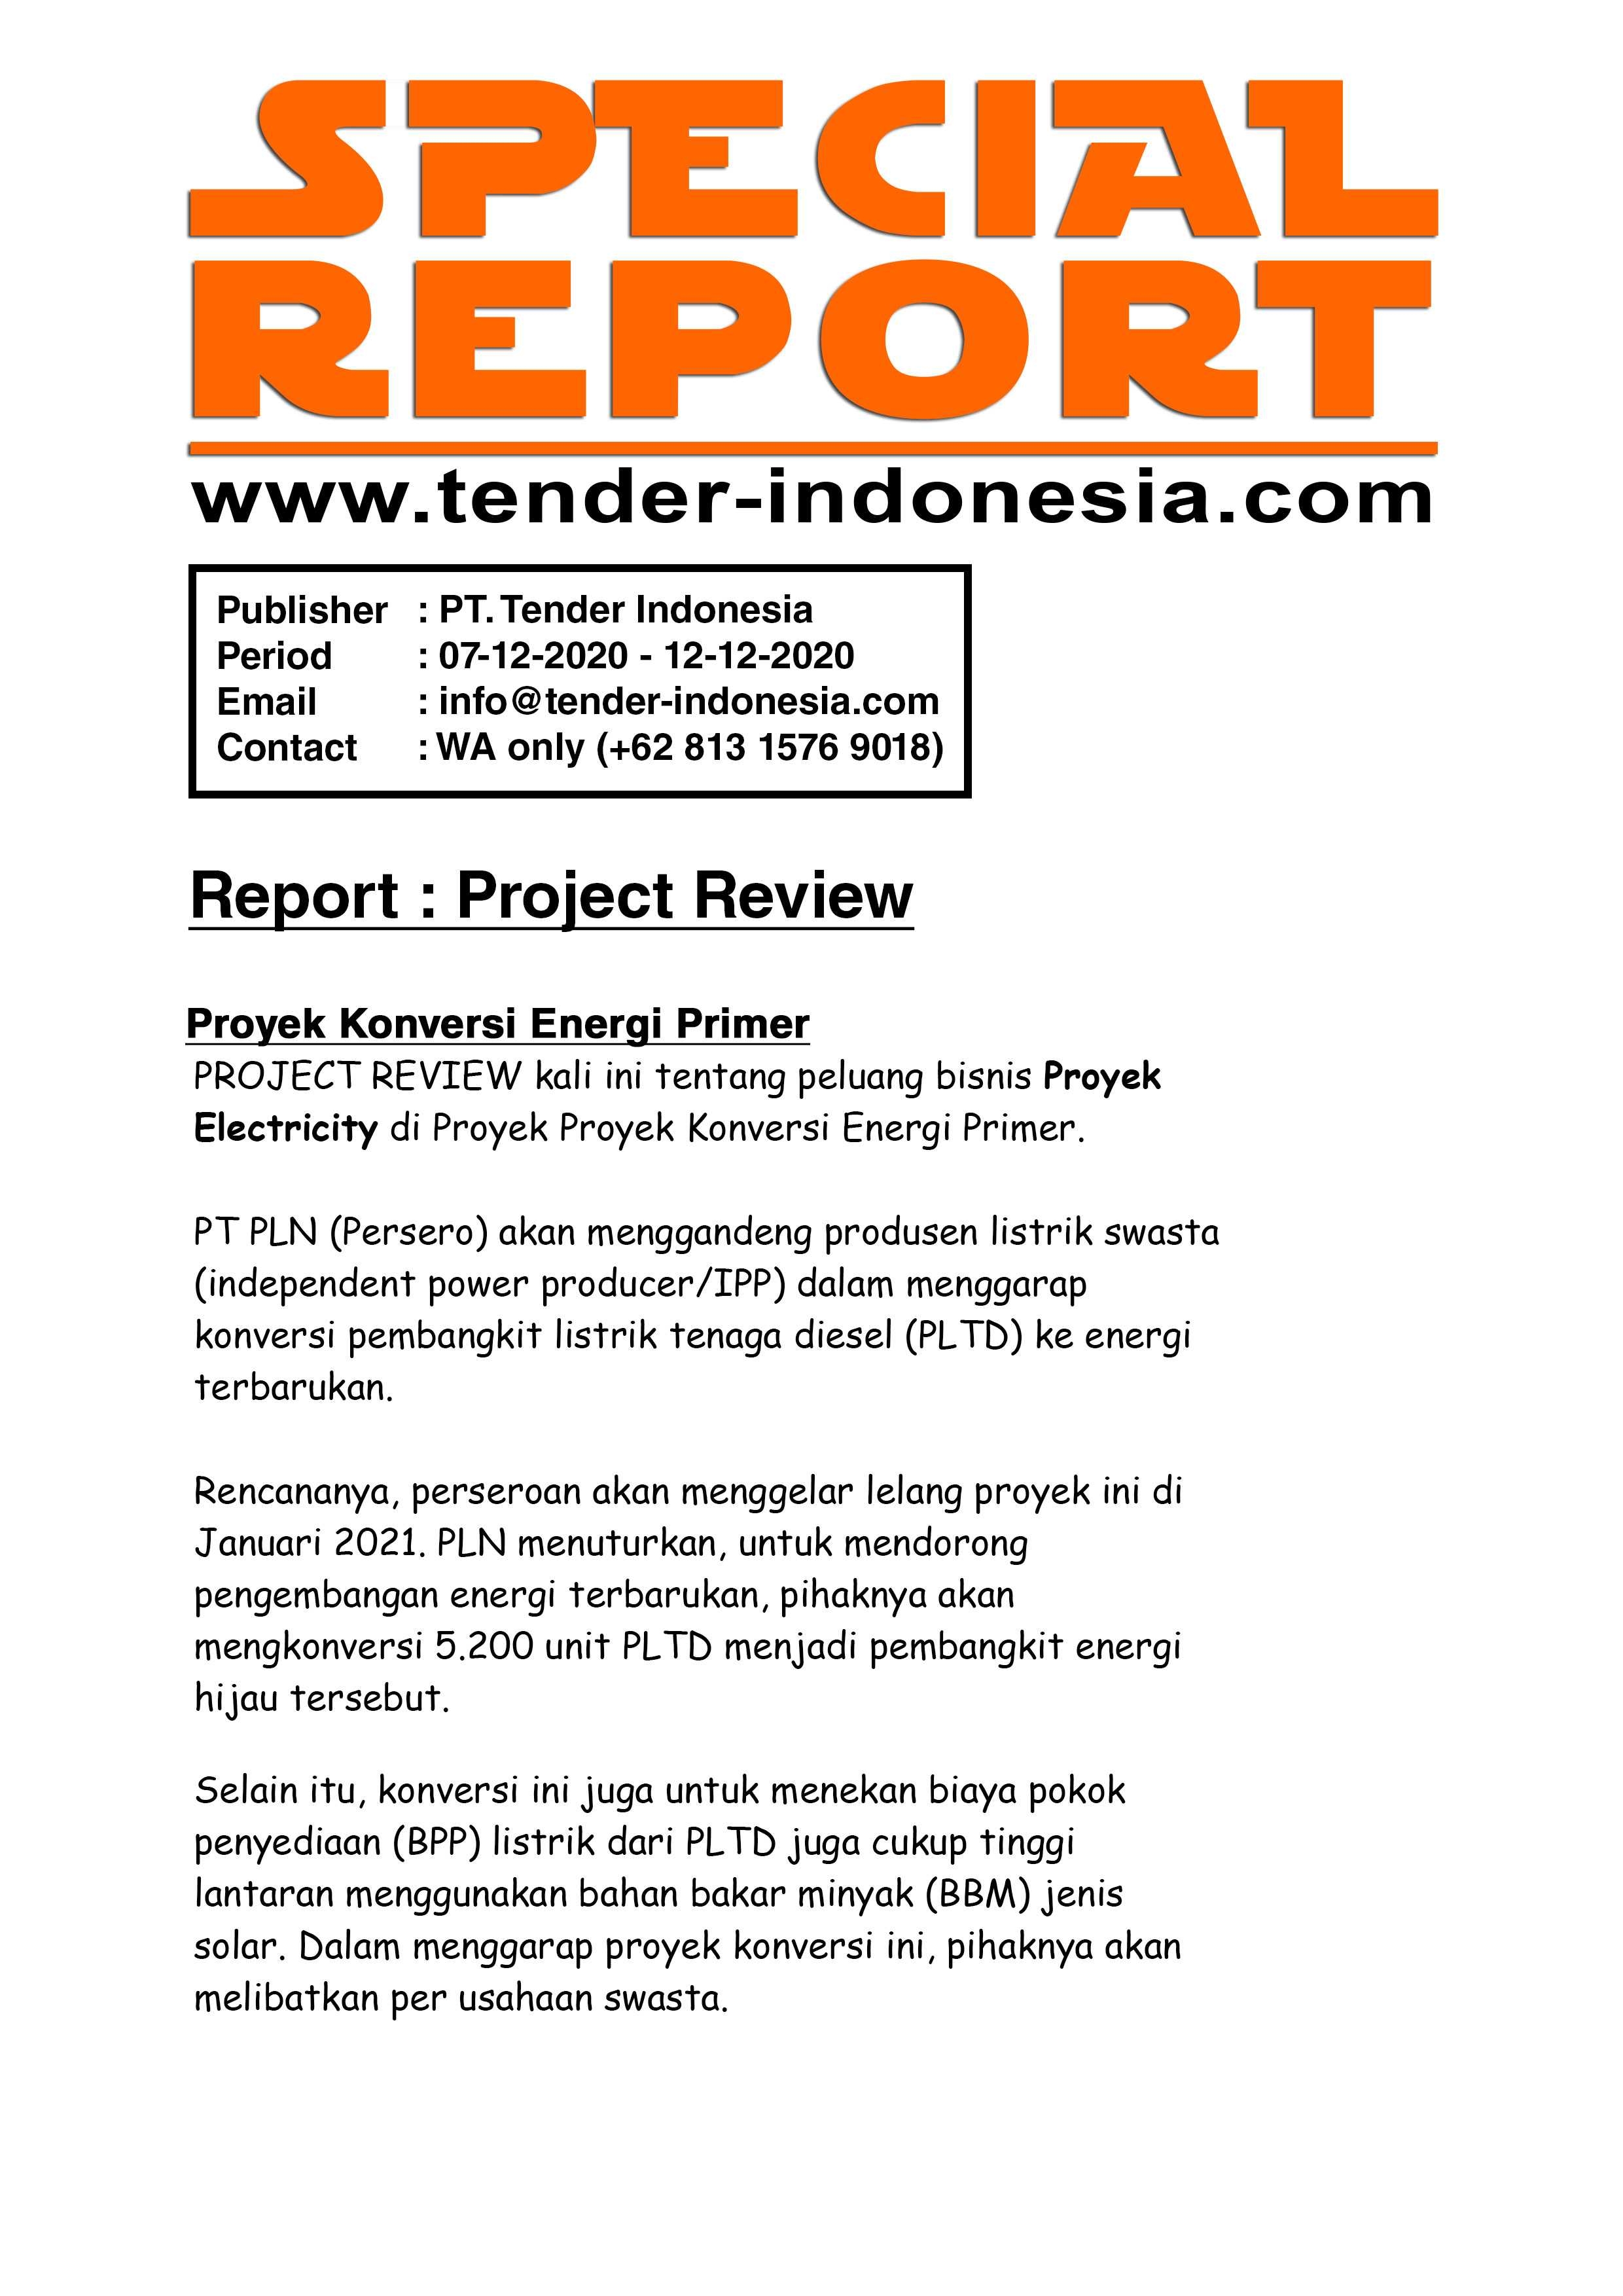 Weekly Project Review (Edisi 07 Desember - 12 Desember 2020)